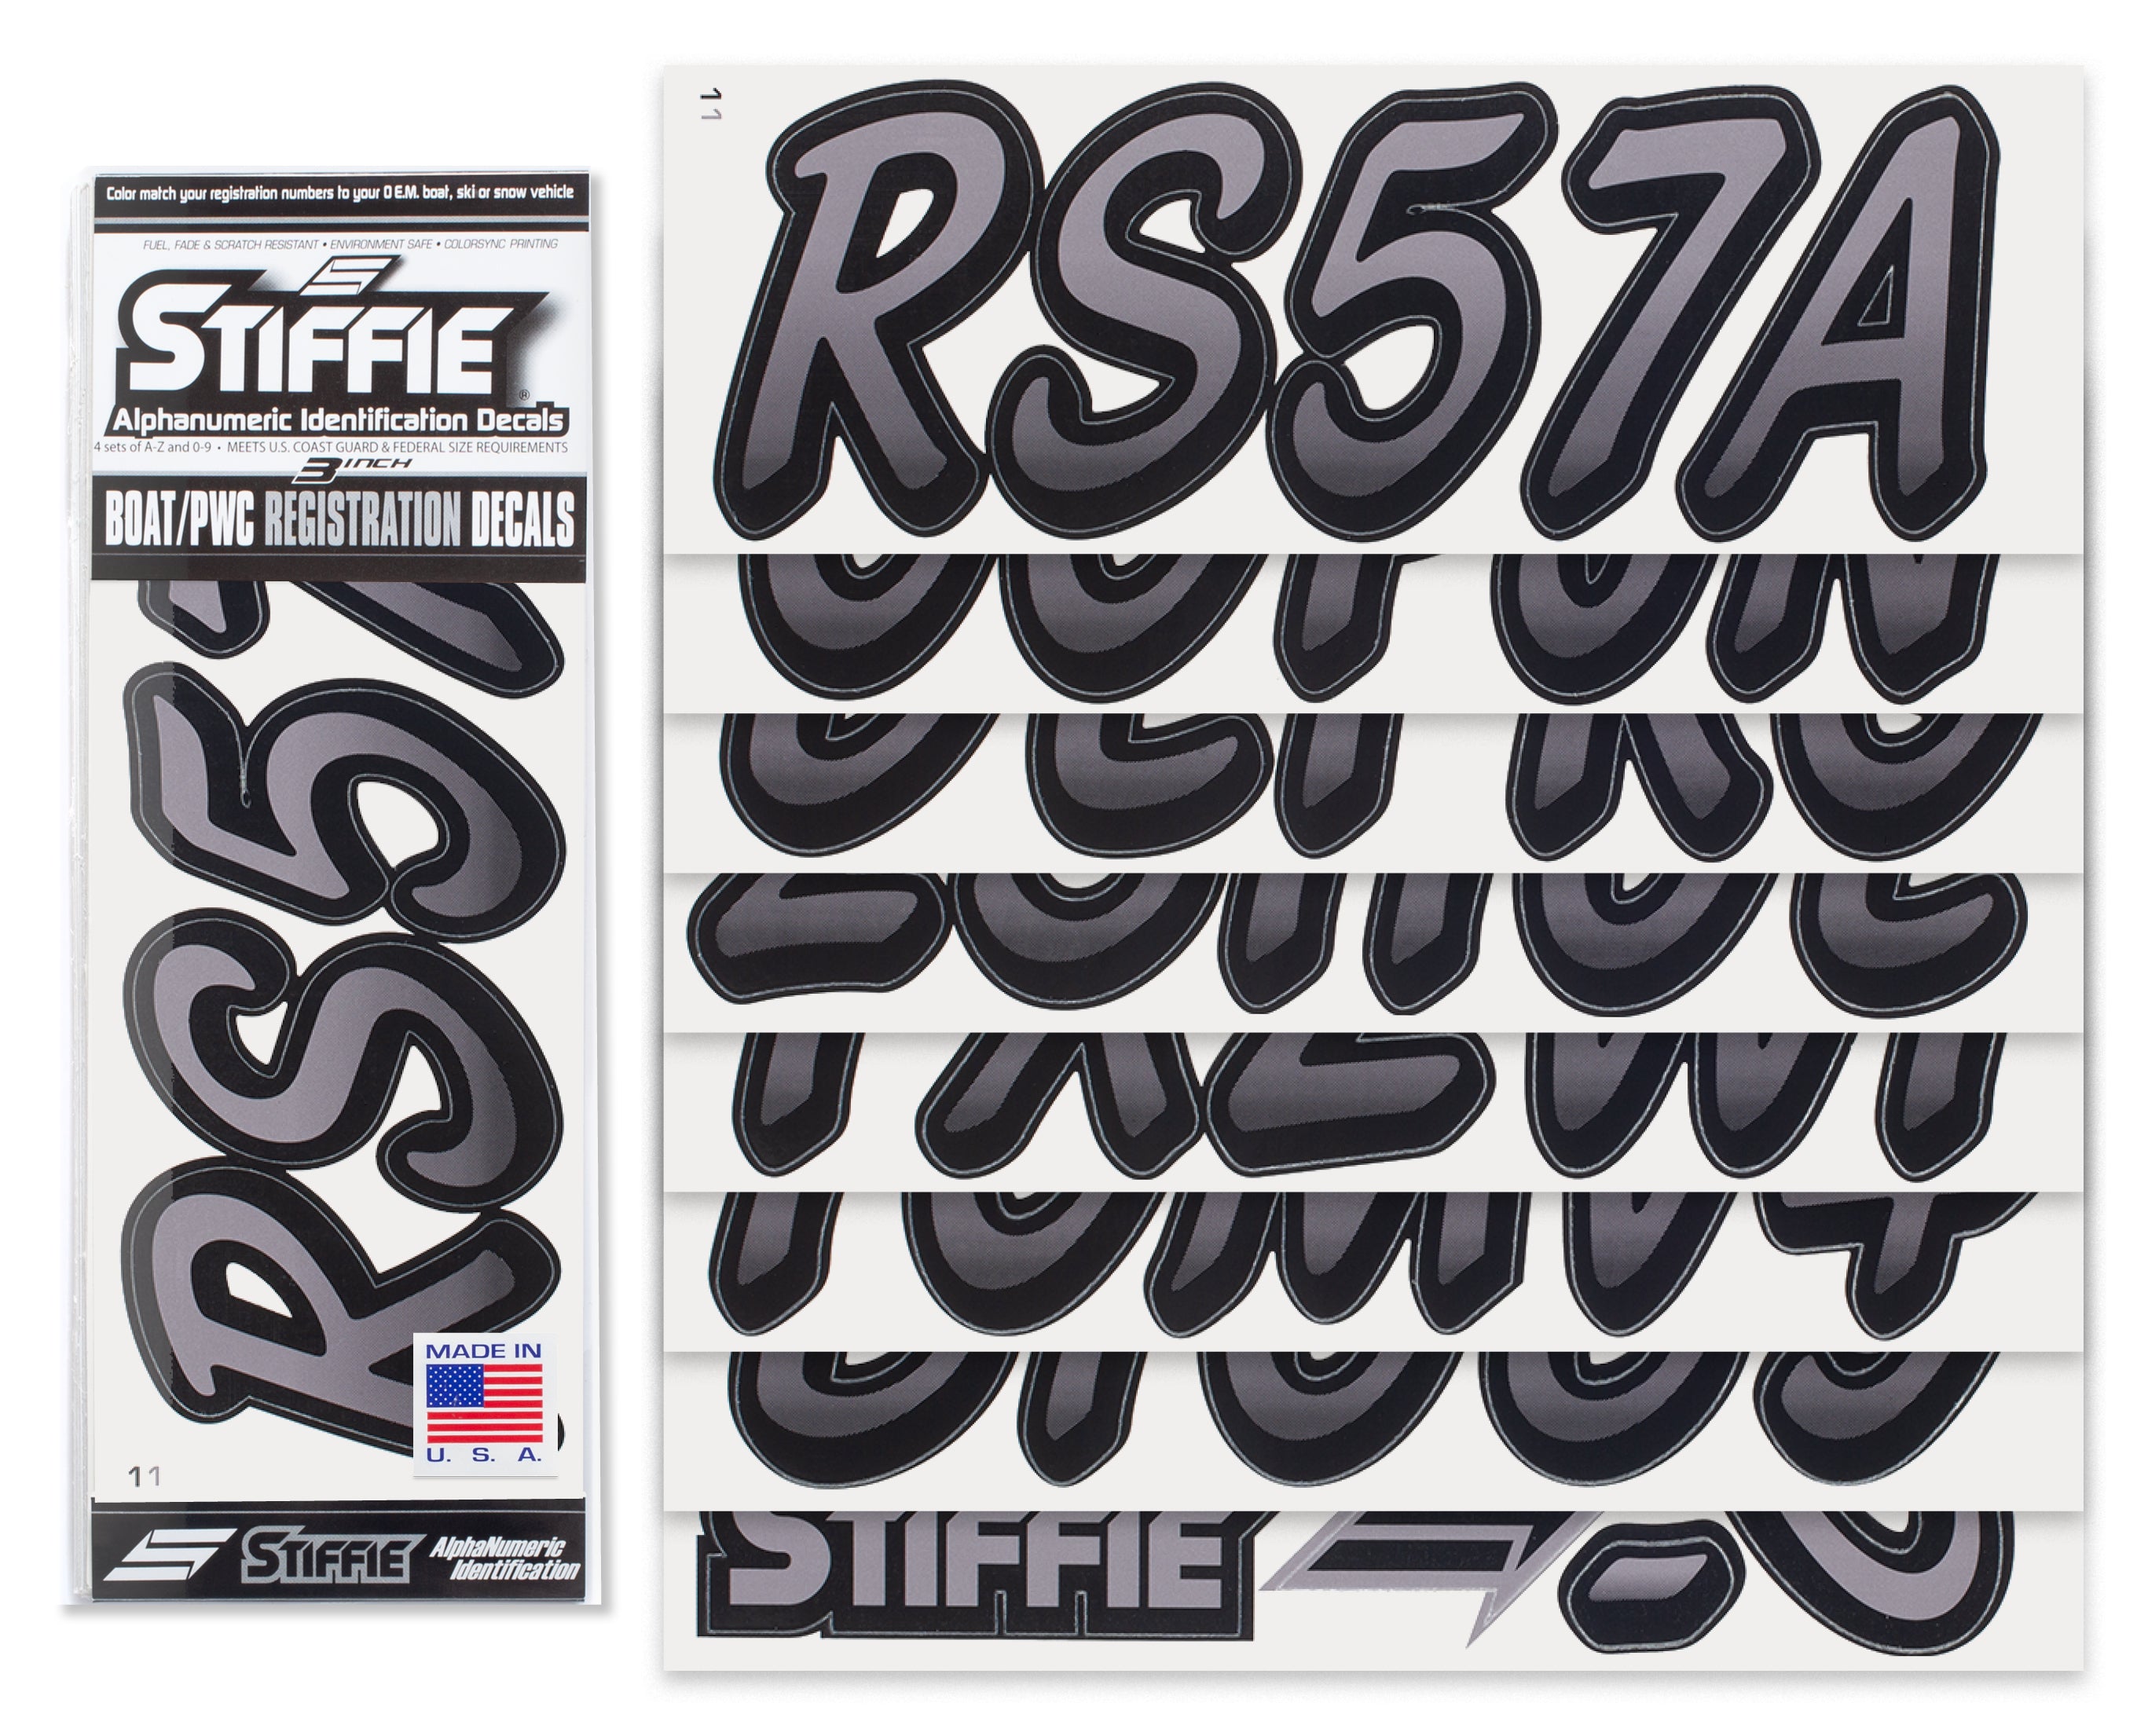 STIFFIE Whipline Gunmetal/Black 3" Alpha-Numeric Registration Identification Numbers Stickers Decals for Boats & Personal Watercraft